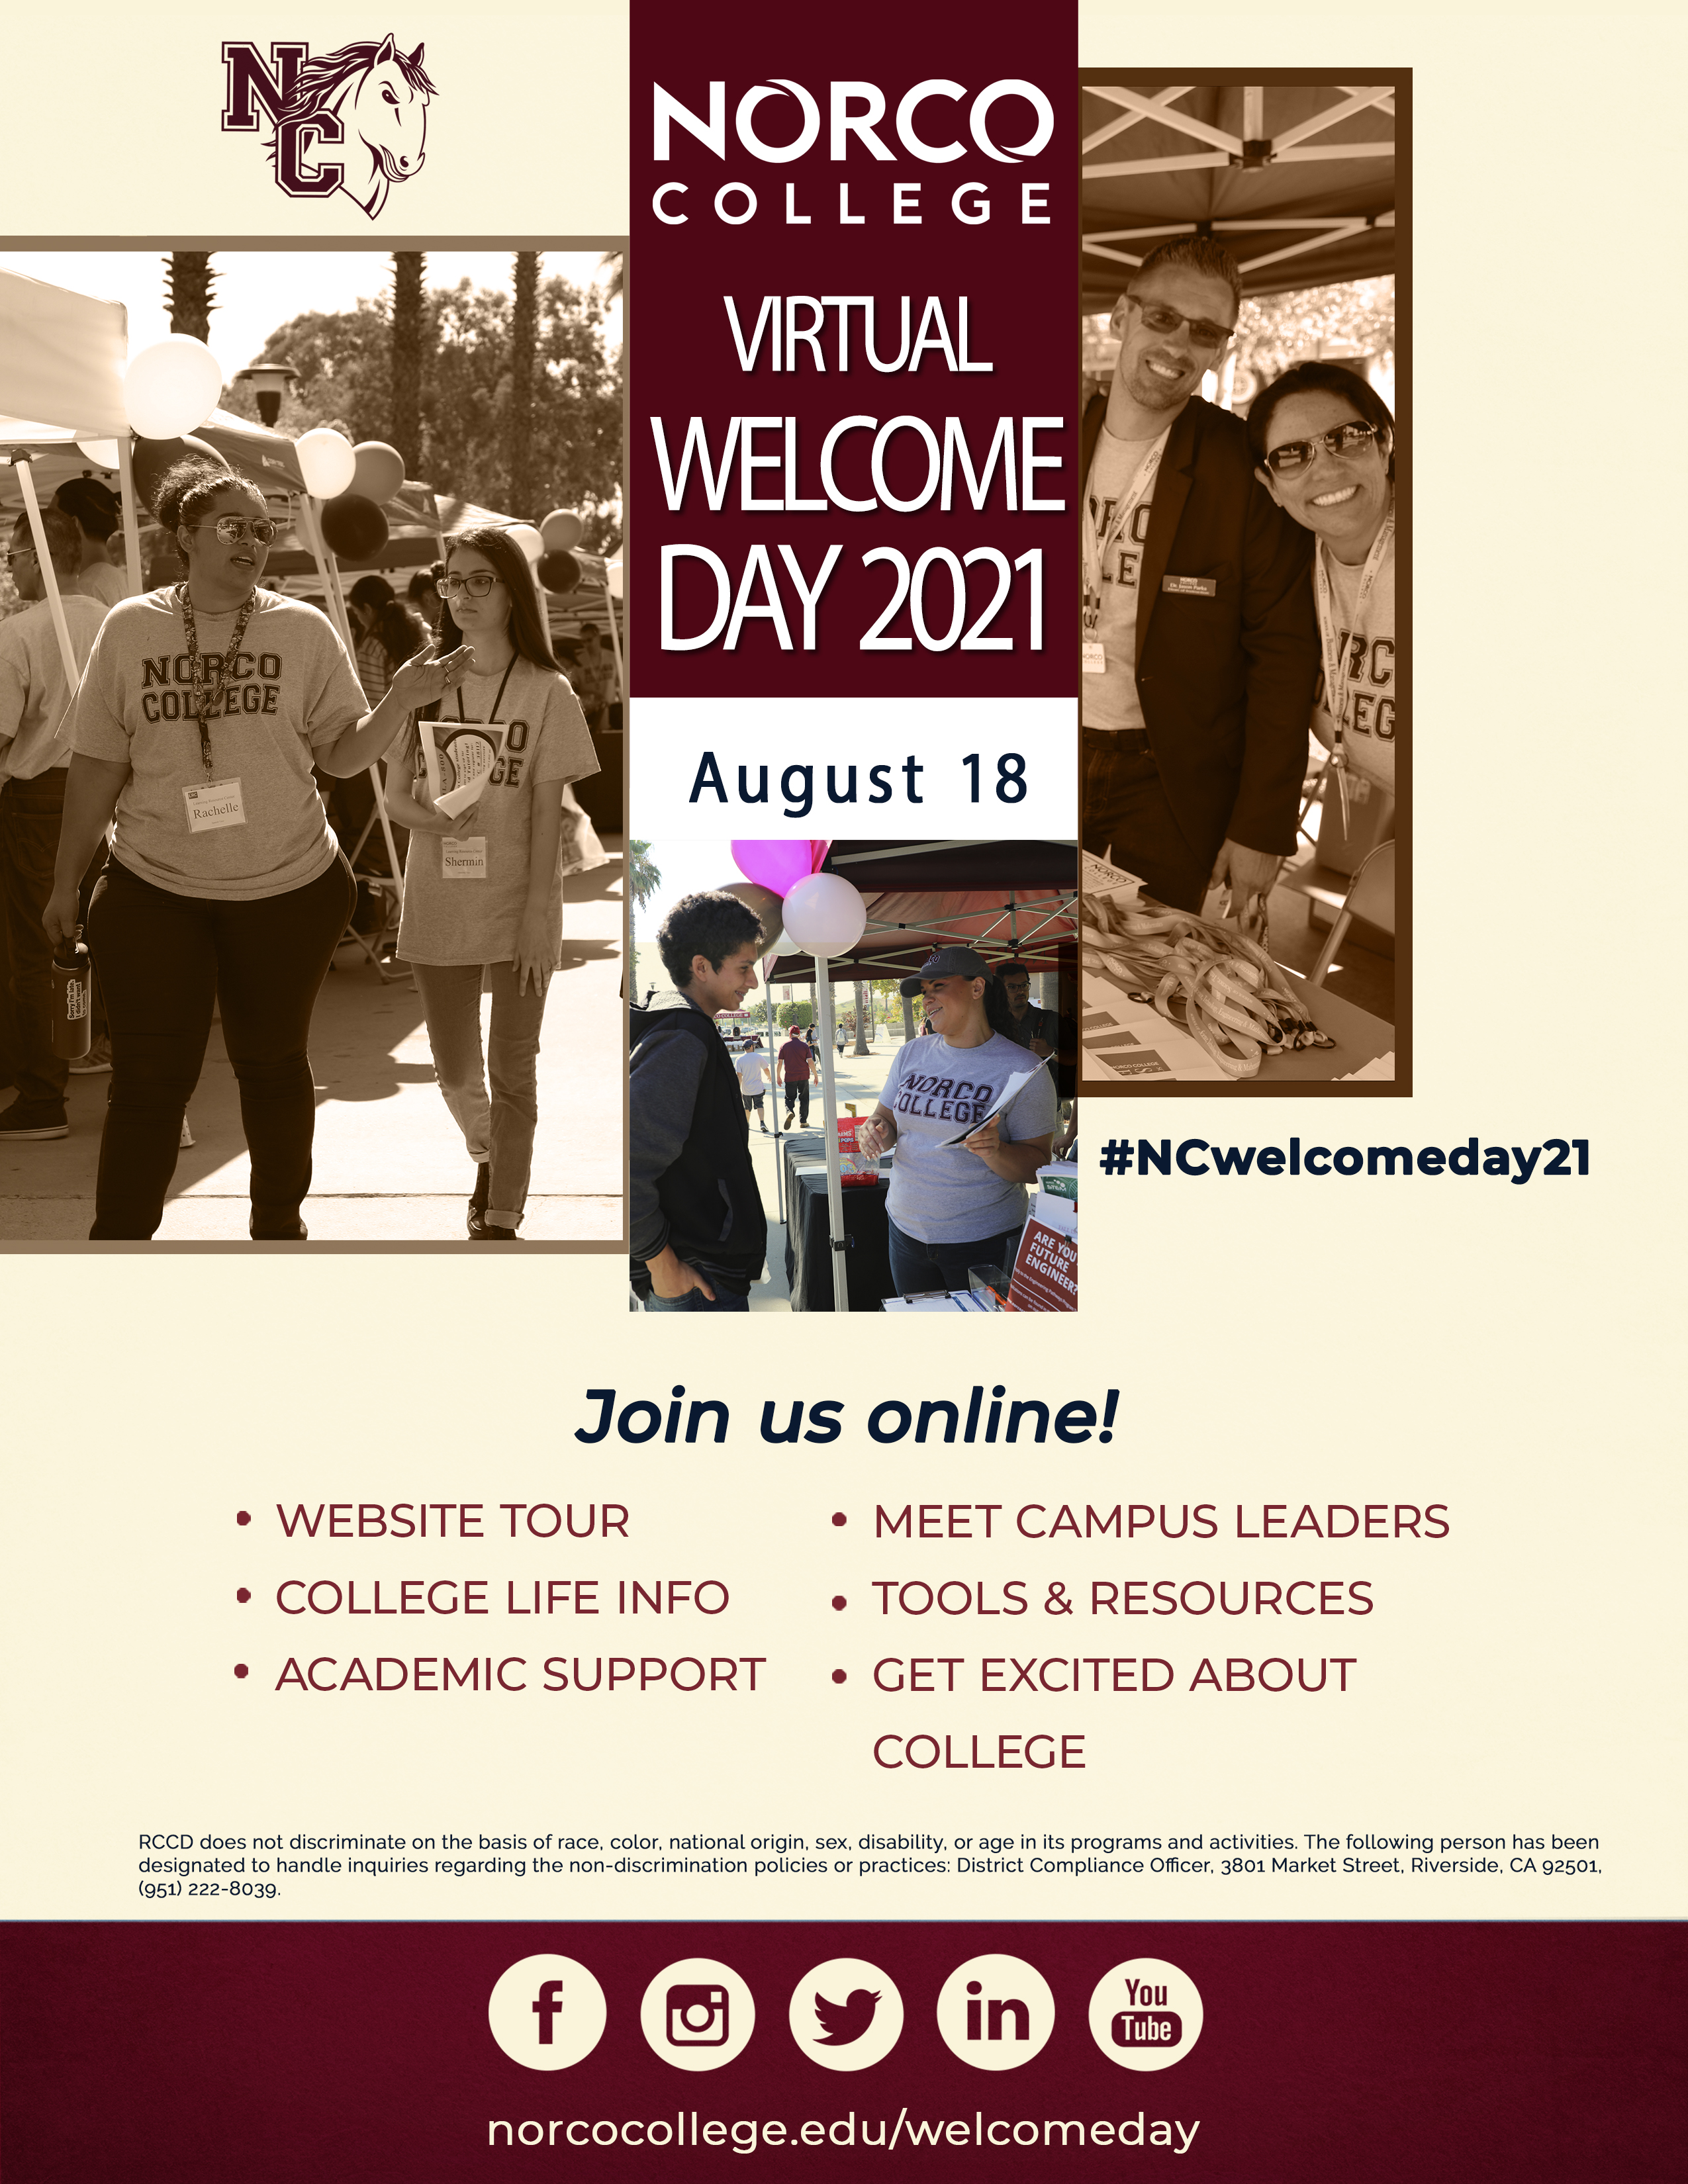 Norco College Welcome Day 2021 Postcard